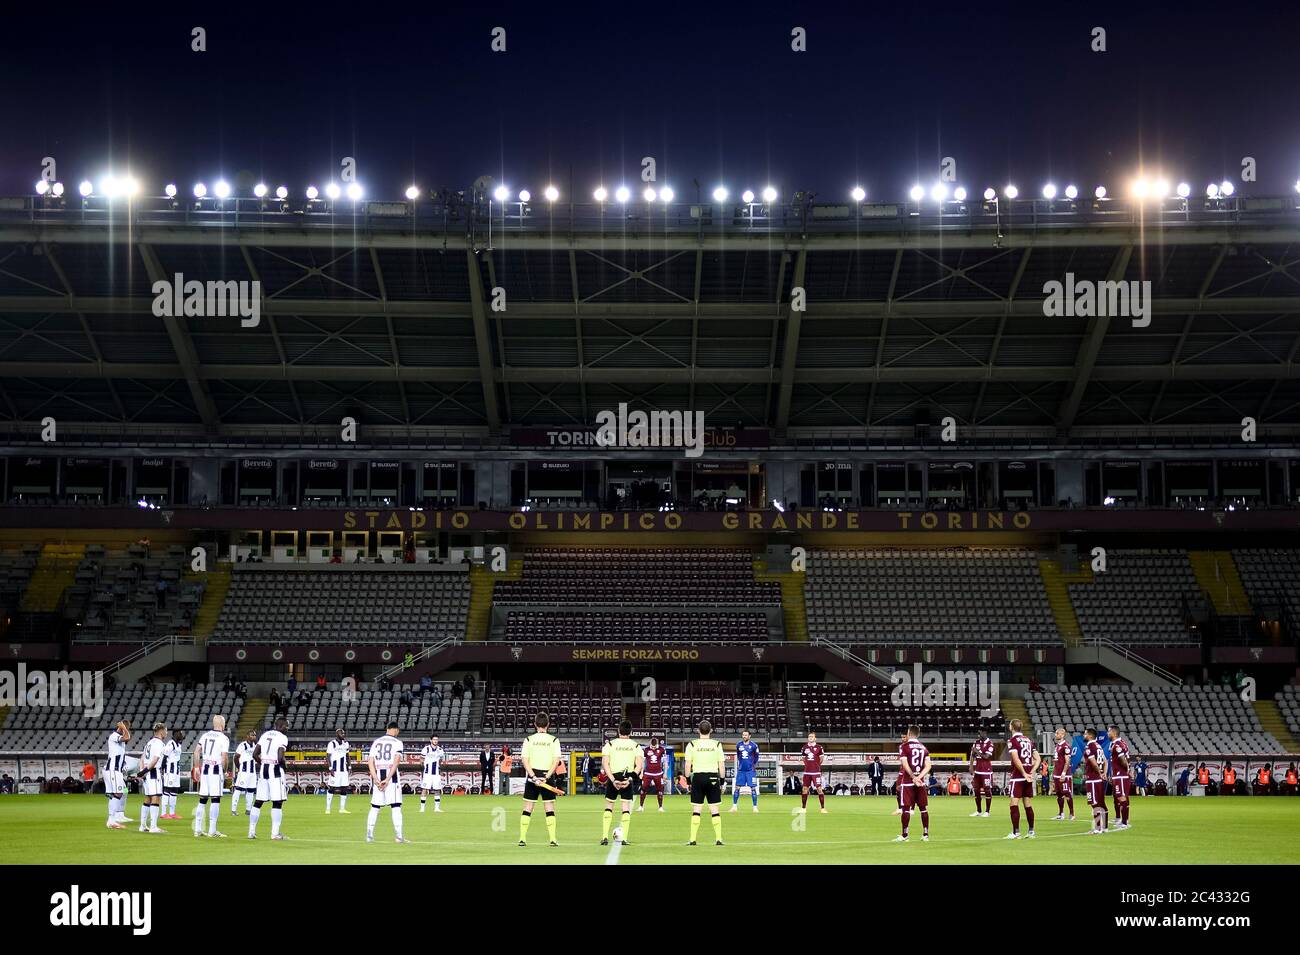 Turin, Italy - 23 June, 2020: Players and referees hold a minute's silence for the victims of COVID-19 prior to the Serie A football match between Torino FC and Udinese Calcio. Credit: Nicolò Campo/Alamy Live News Stock Photo